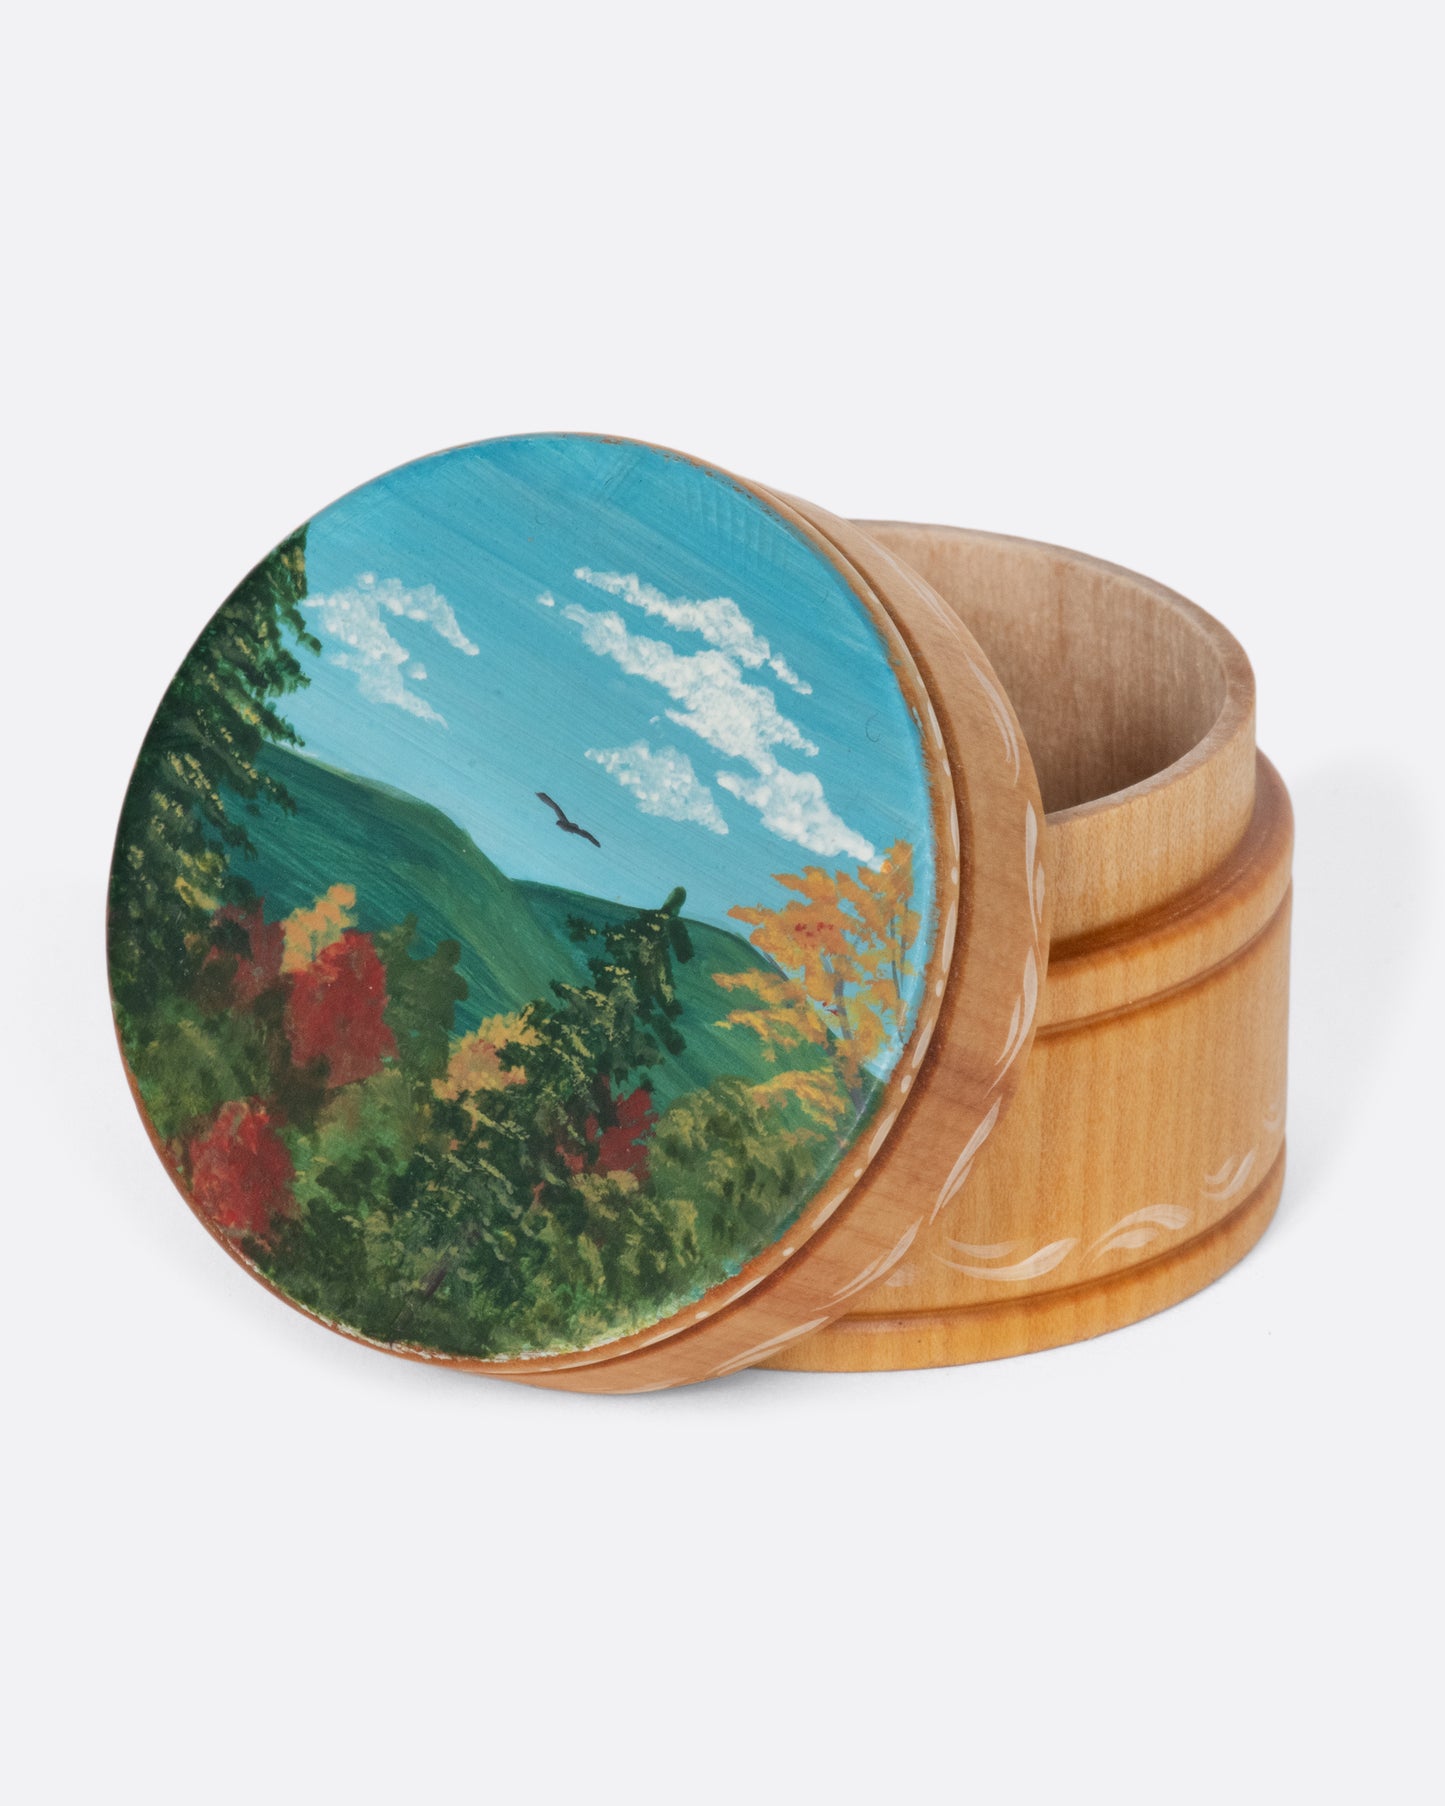 A vintage round wooden box with a beautiful landscape painting on the lid.